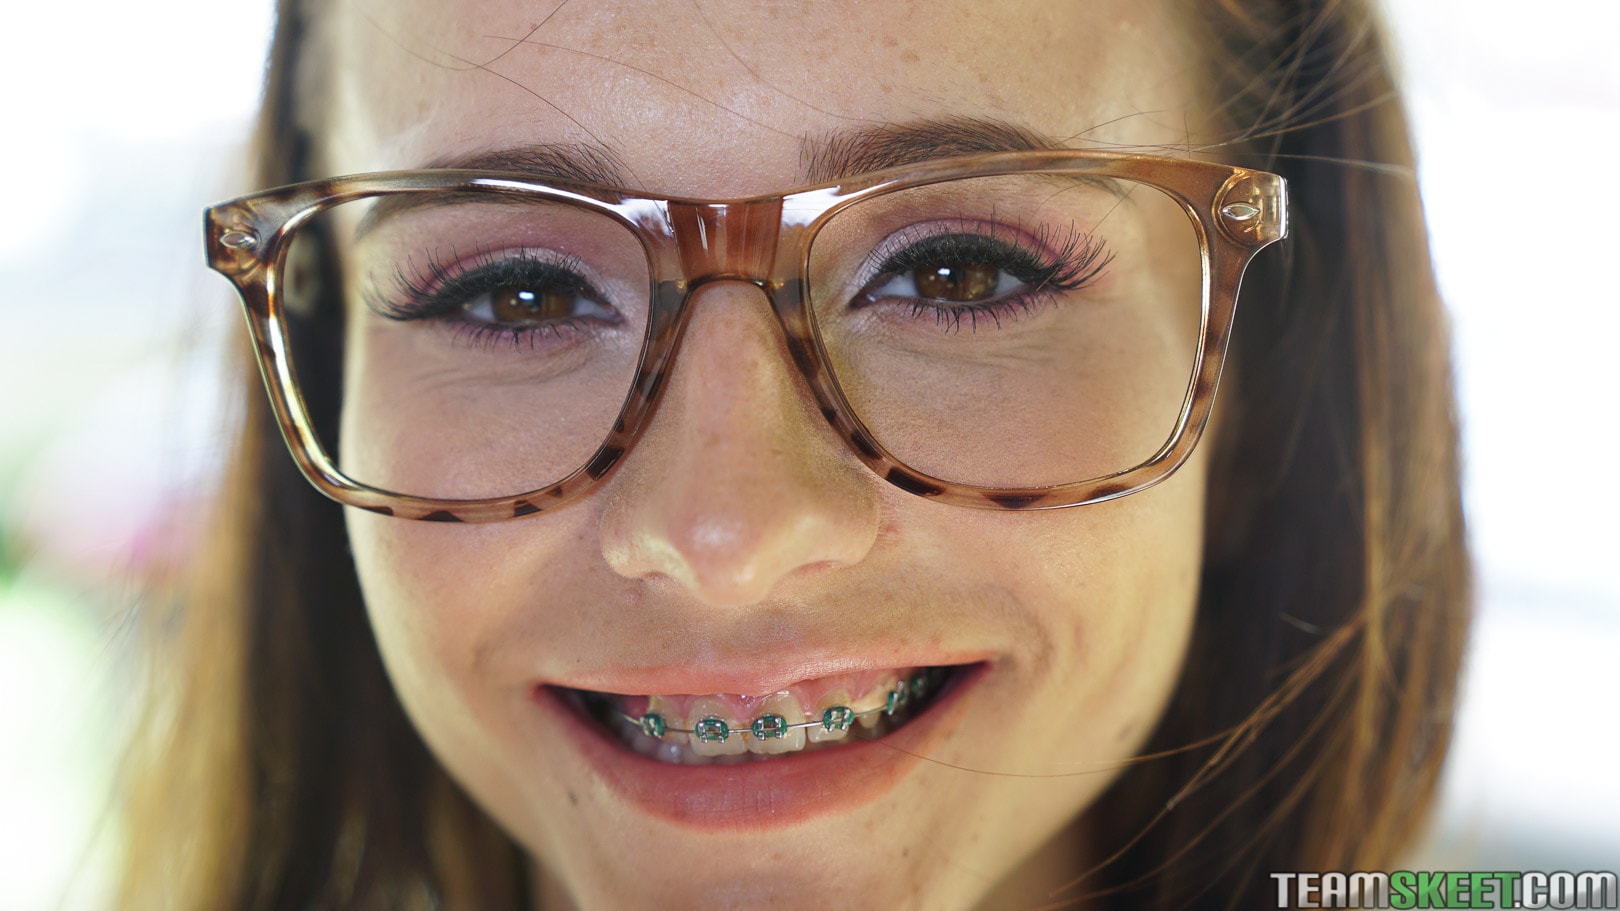 Kharlie Stone - College Guys Love Braces | Picture (12)